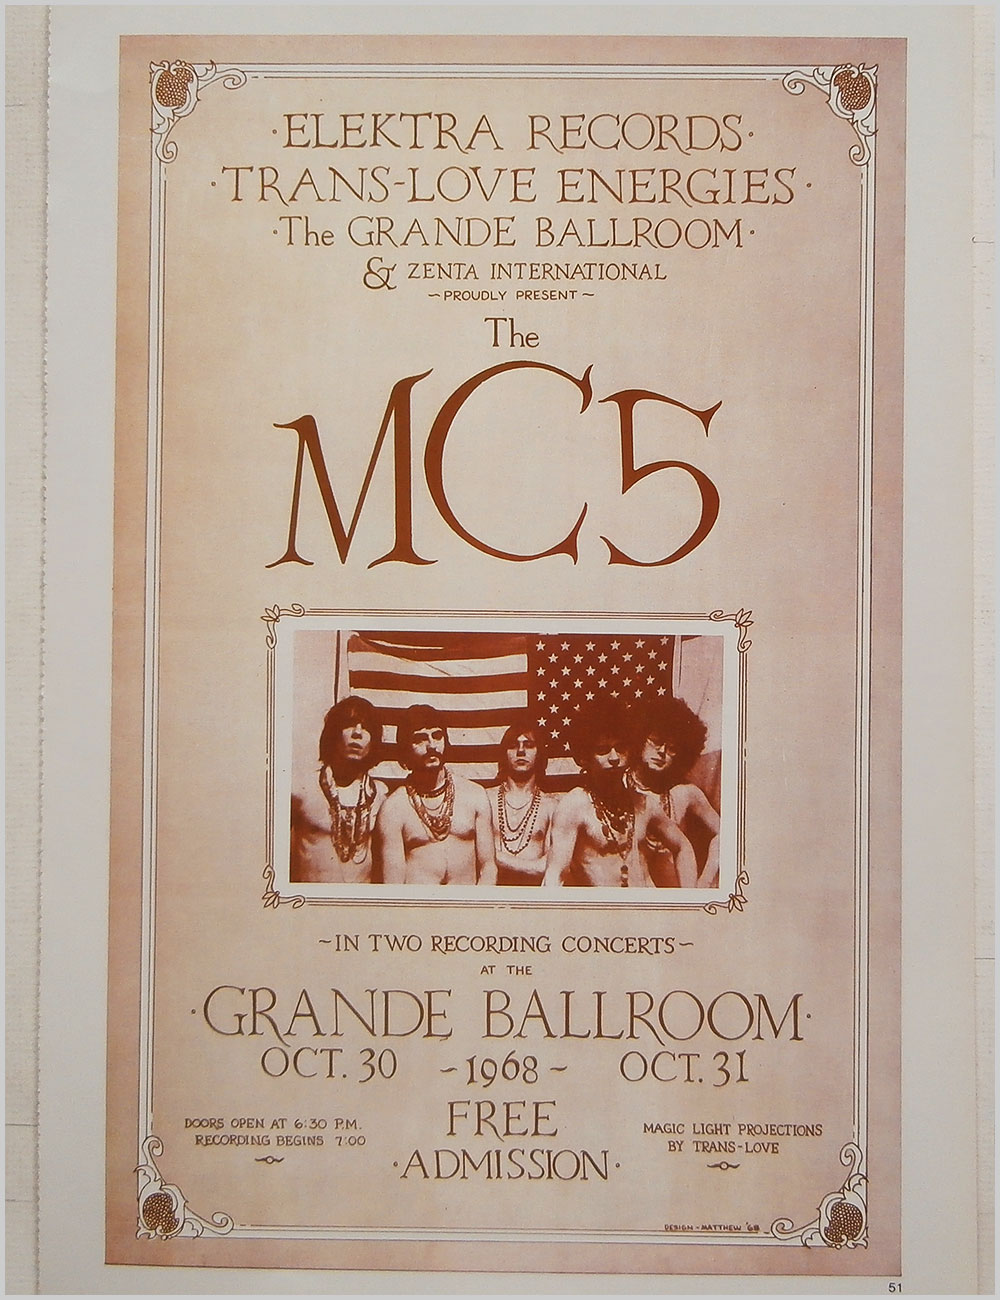 Bob Dylan and The MC5 - Rock Poster: Bob Dylan: Vytas for Mean and Filthy b/w The MC5 at The Grande Ballroom  (PB100283) 